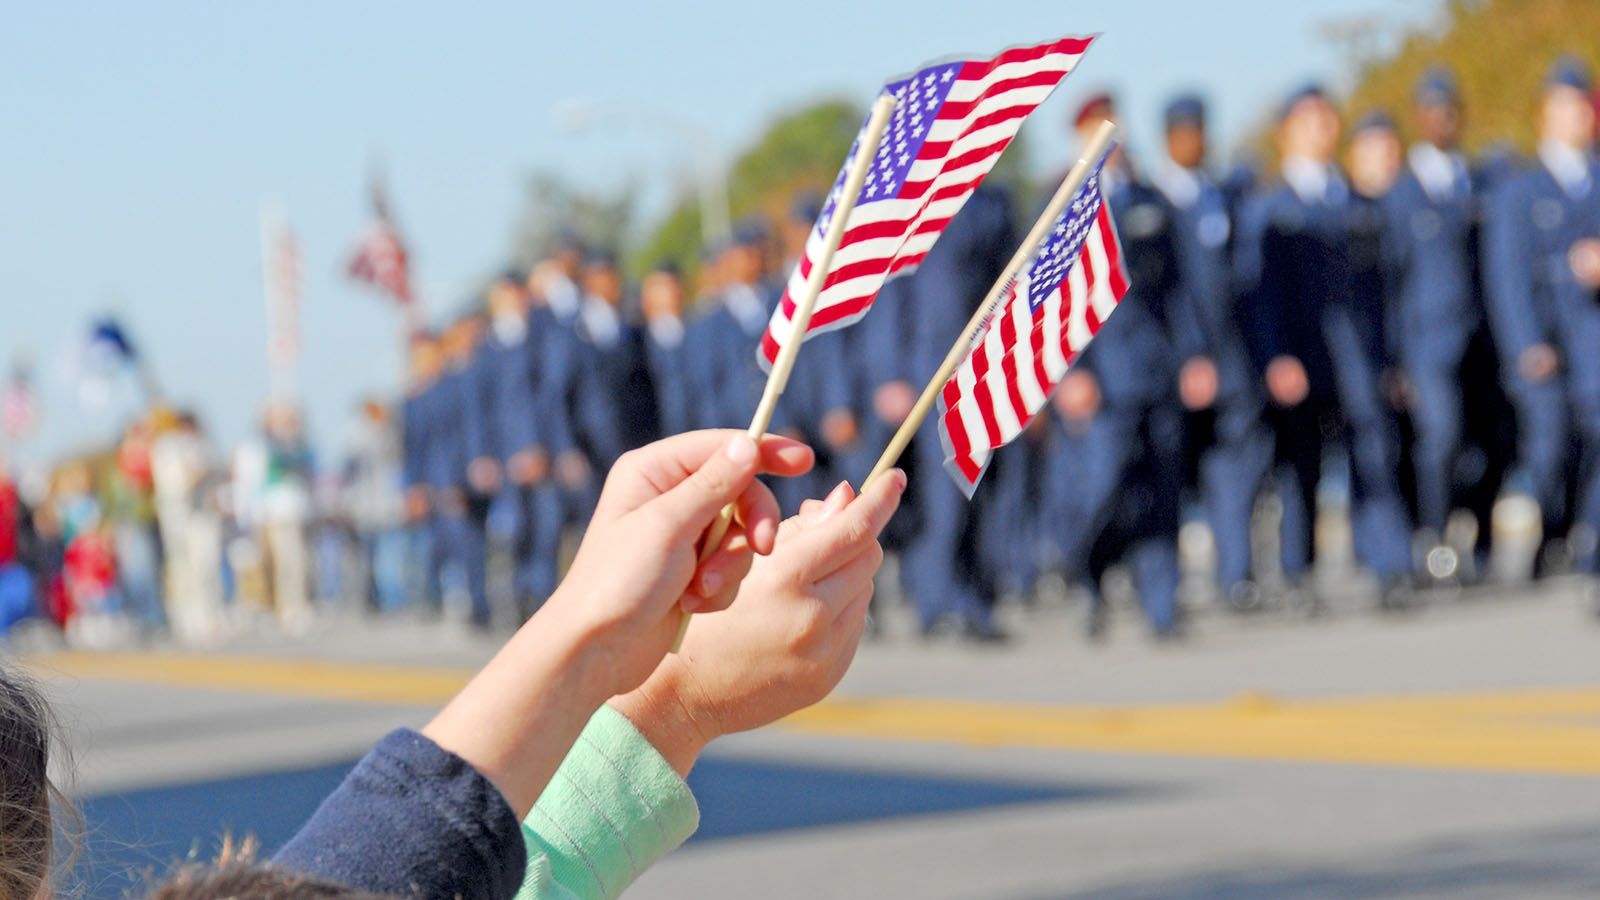 This year's Veterans Day parade will be held on Nov. 4.